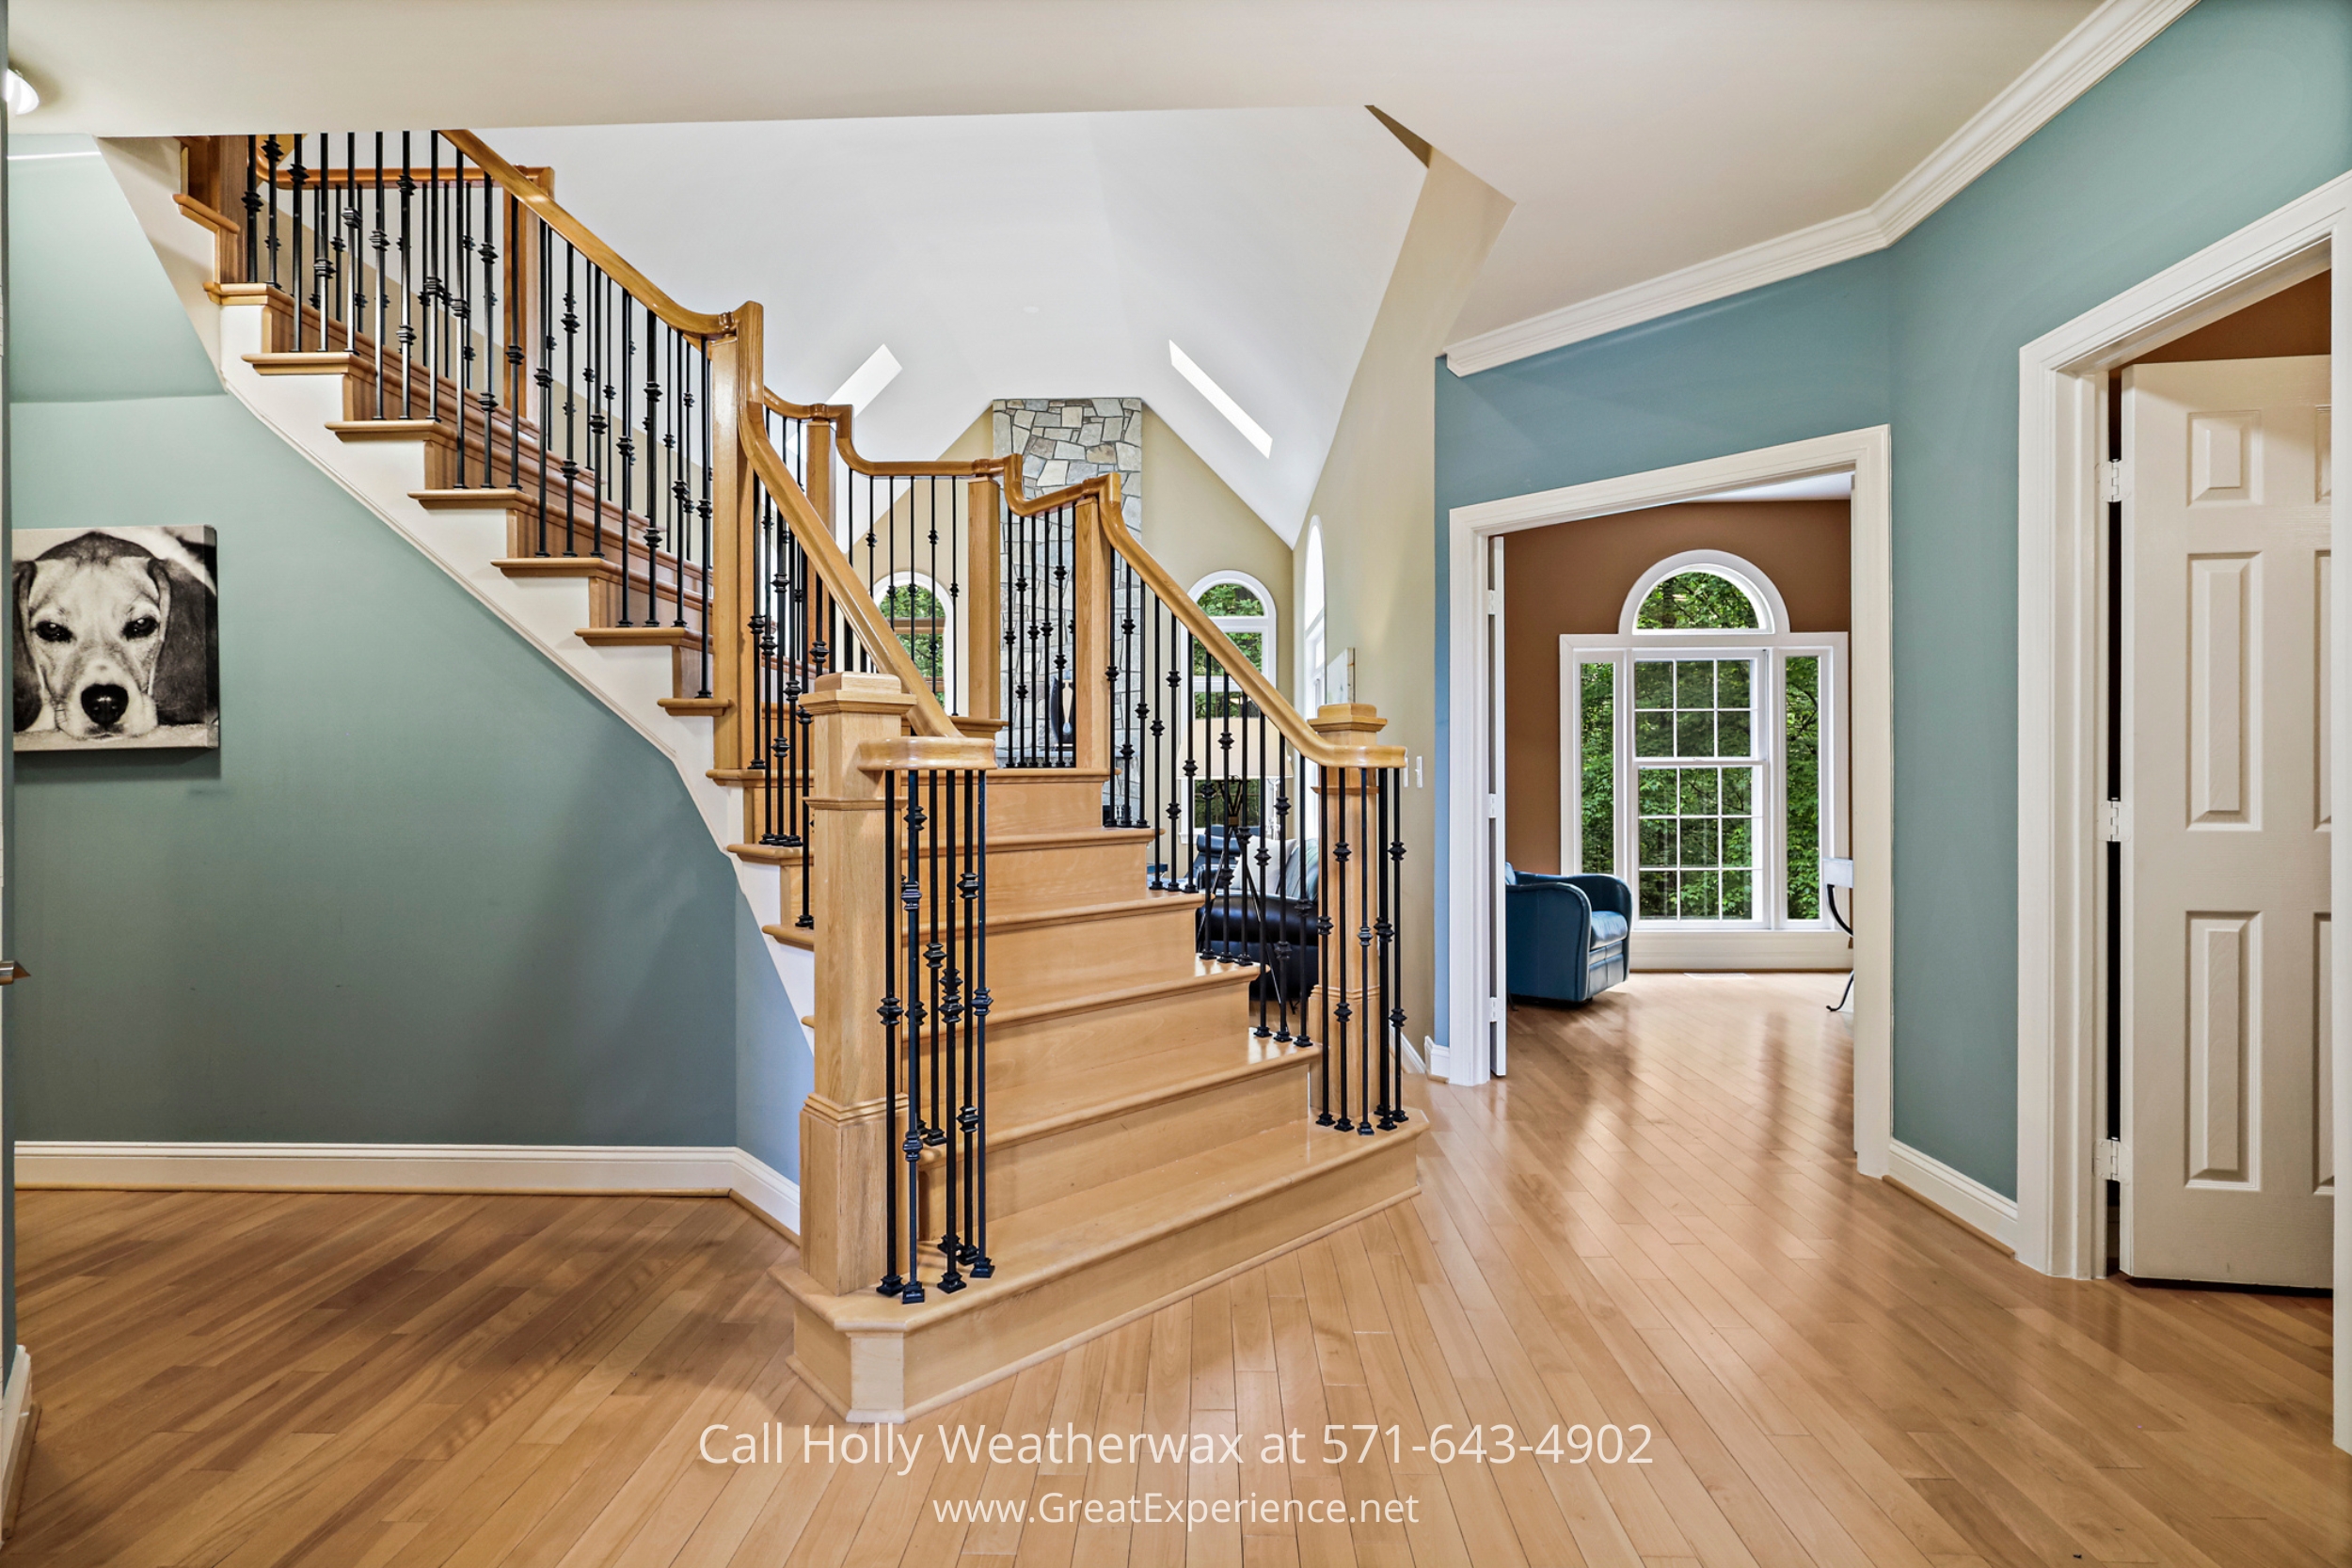 Elegant staircase in a house with striking blue walls and beautiful hardwood floors